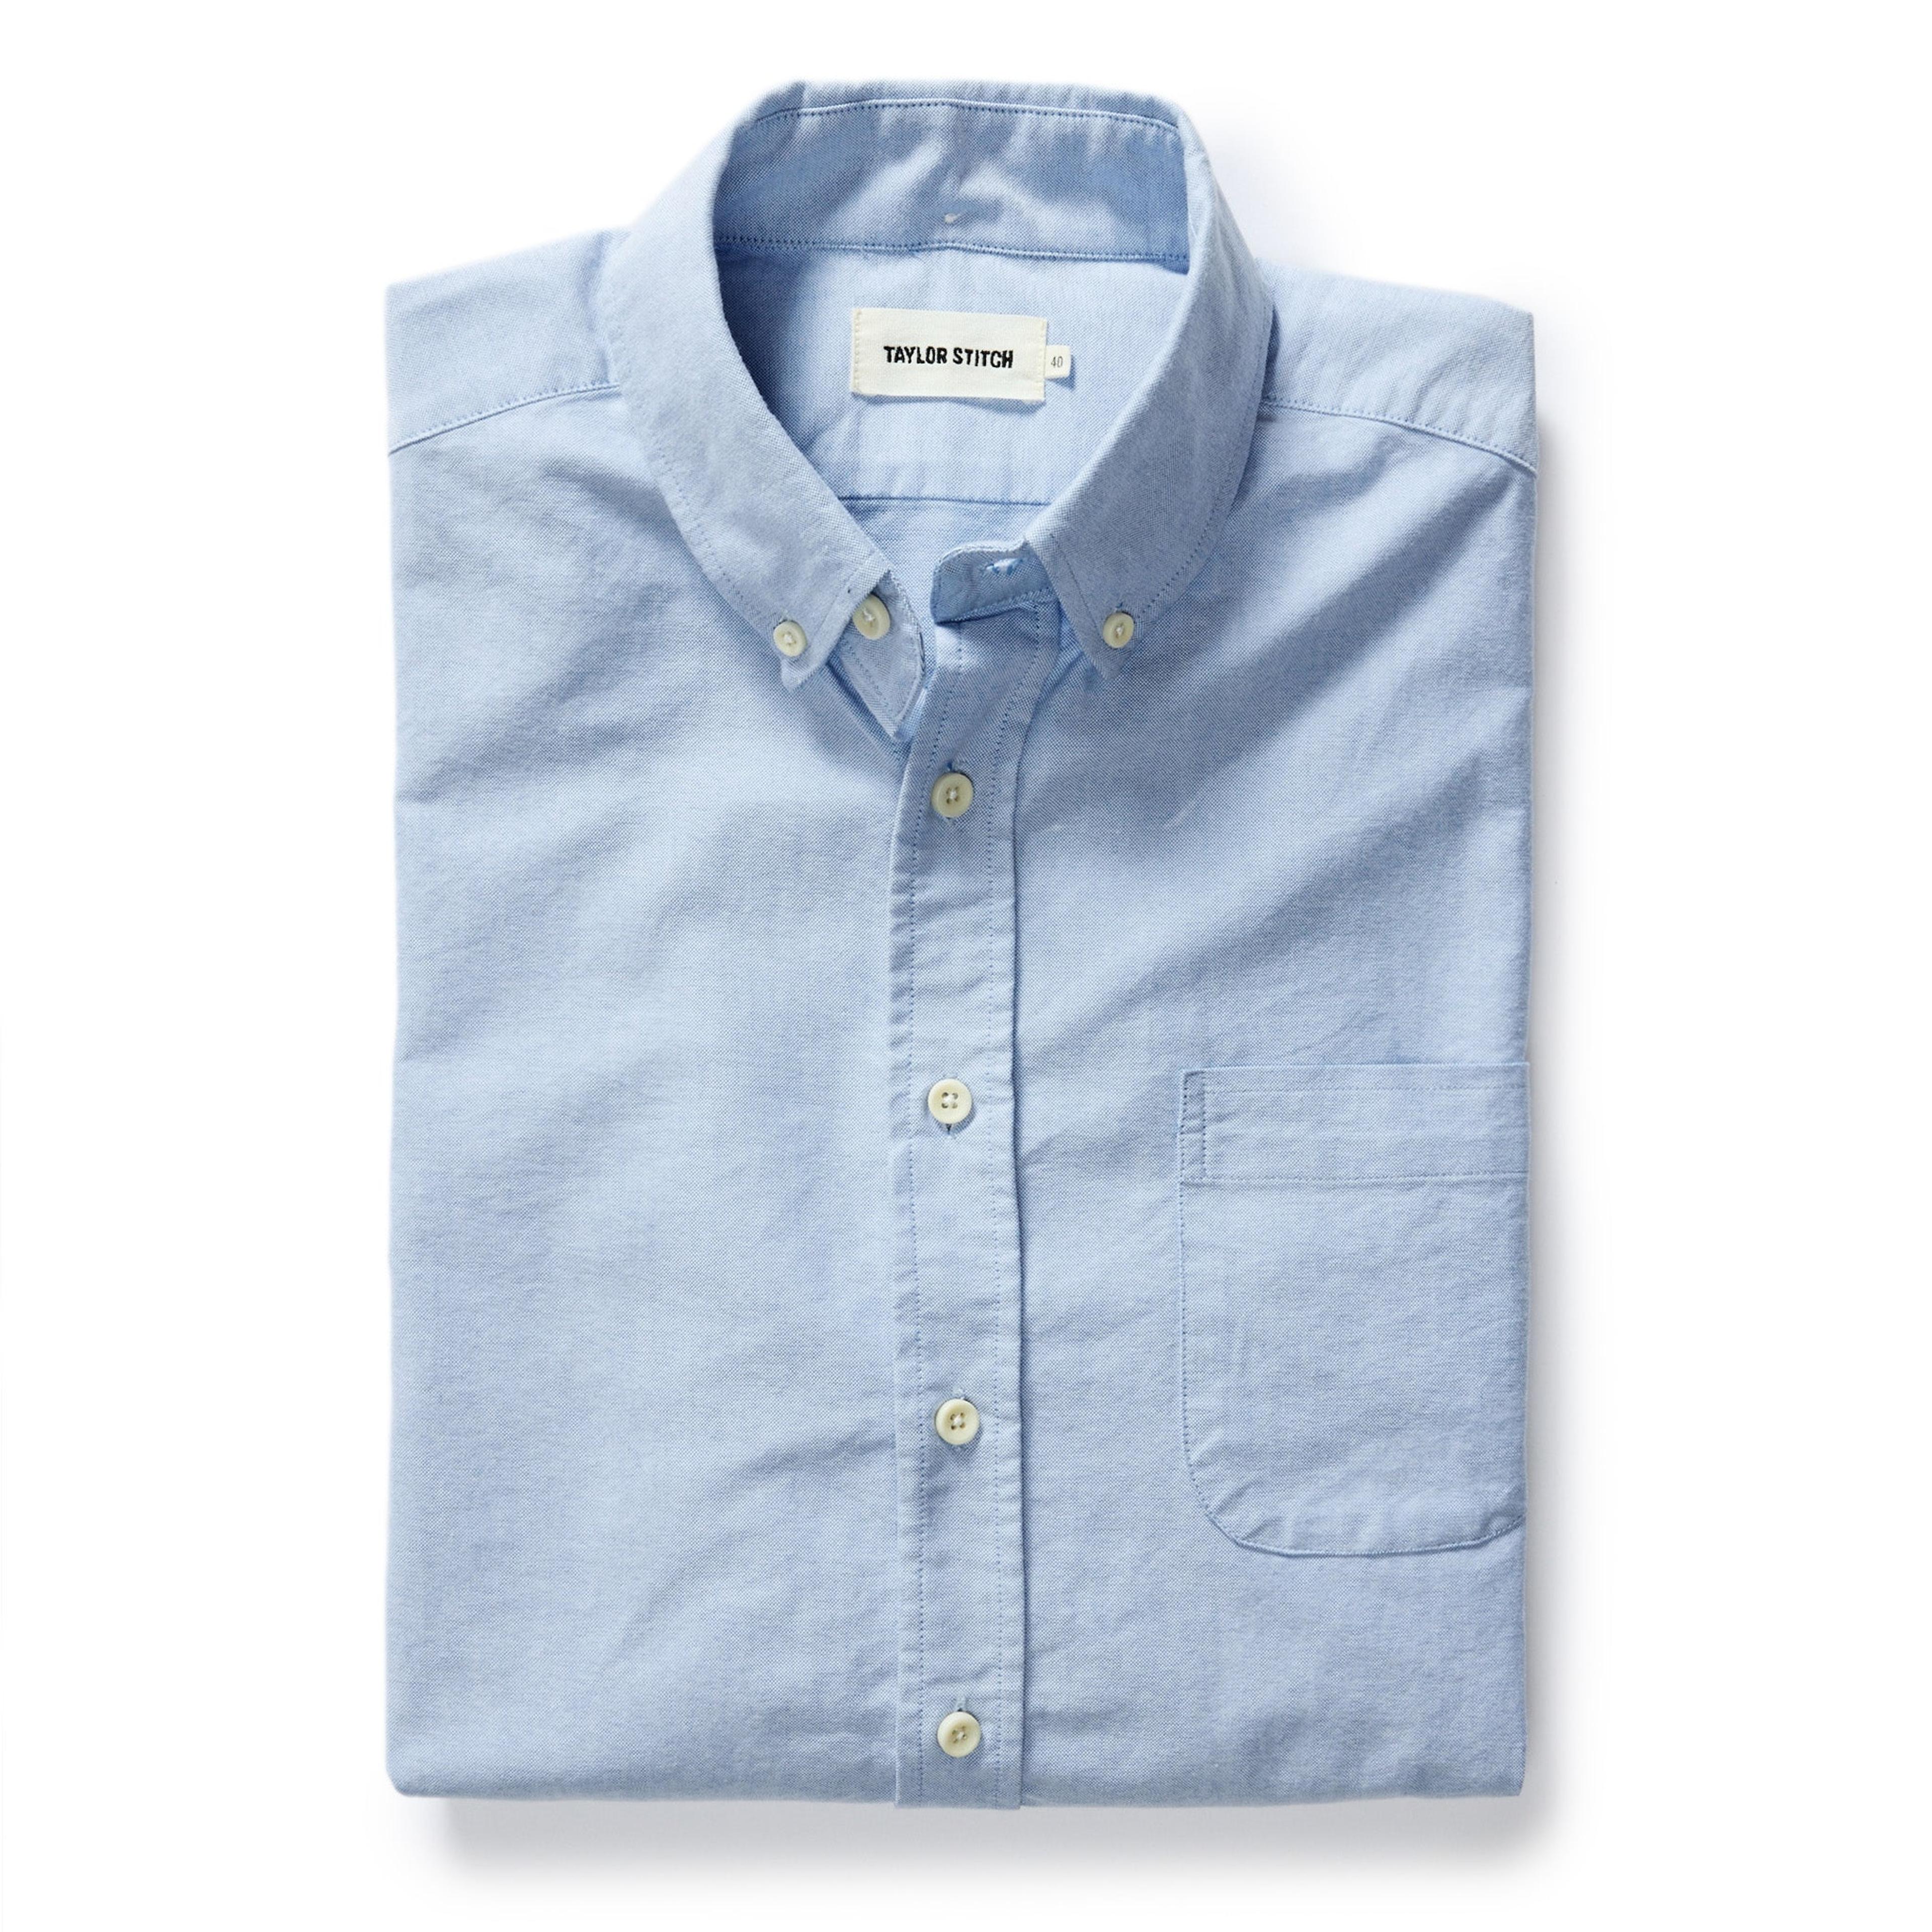 The Jack in Blue Everyday Oxford - Men's Oxford Shirts | Men's Shirts | Taylor Stitch